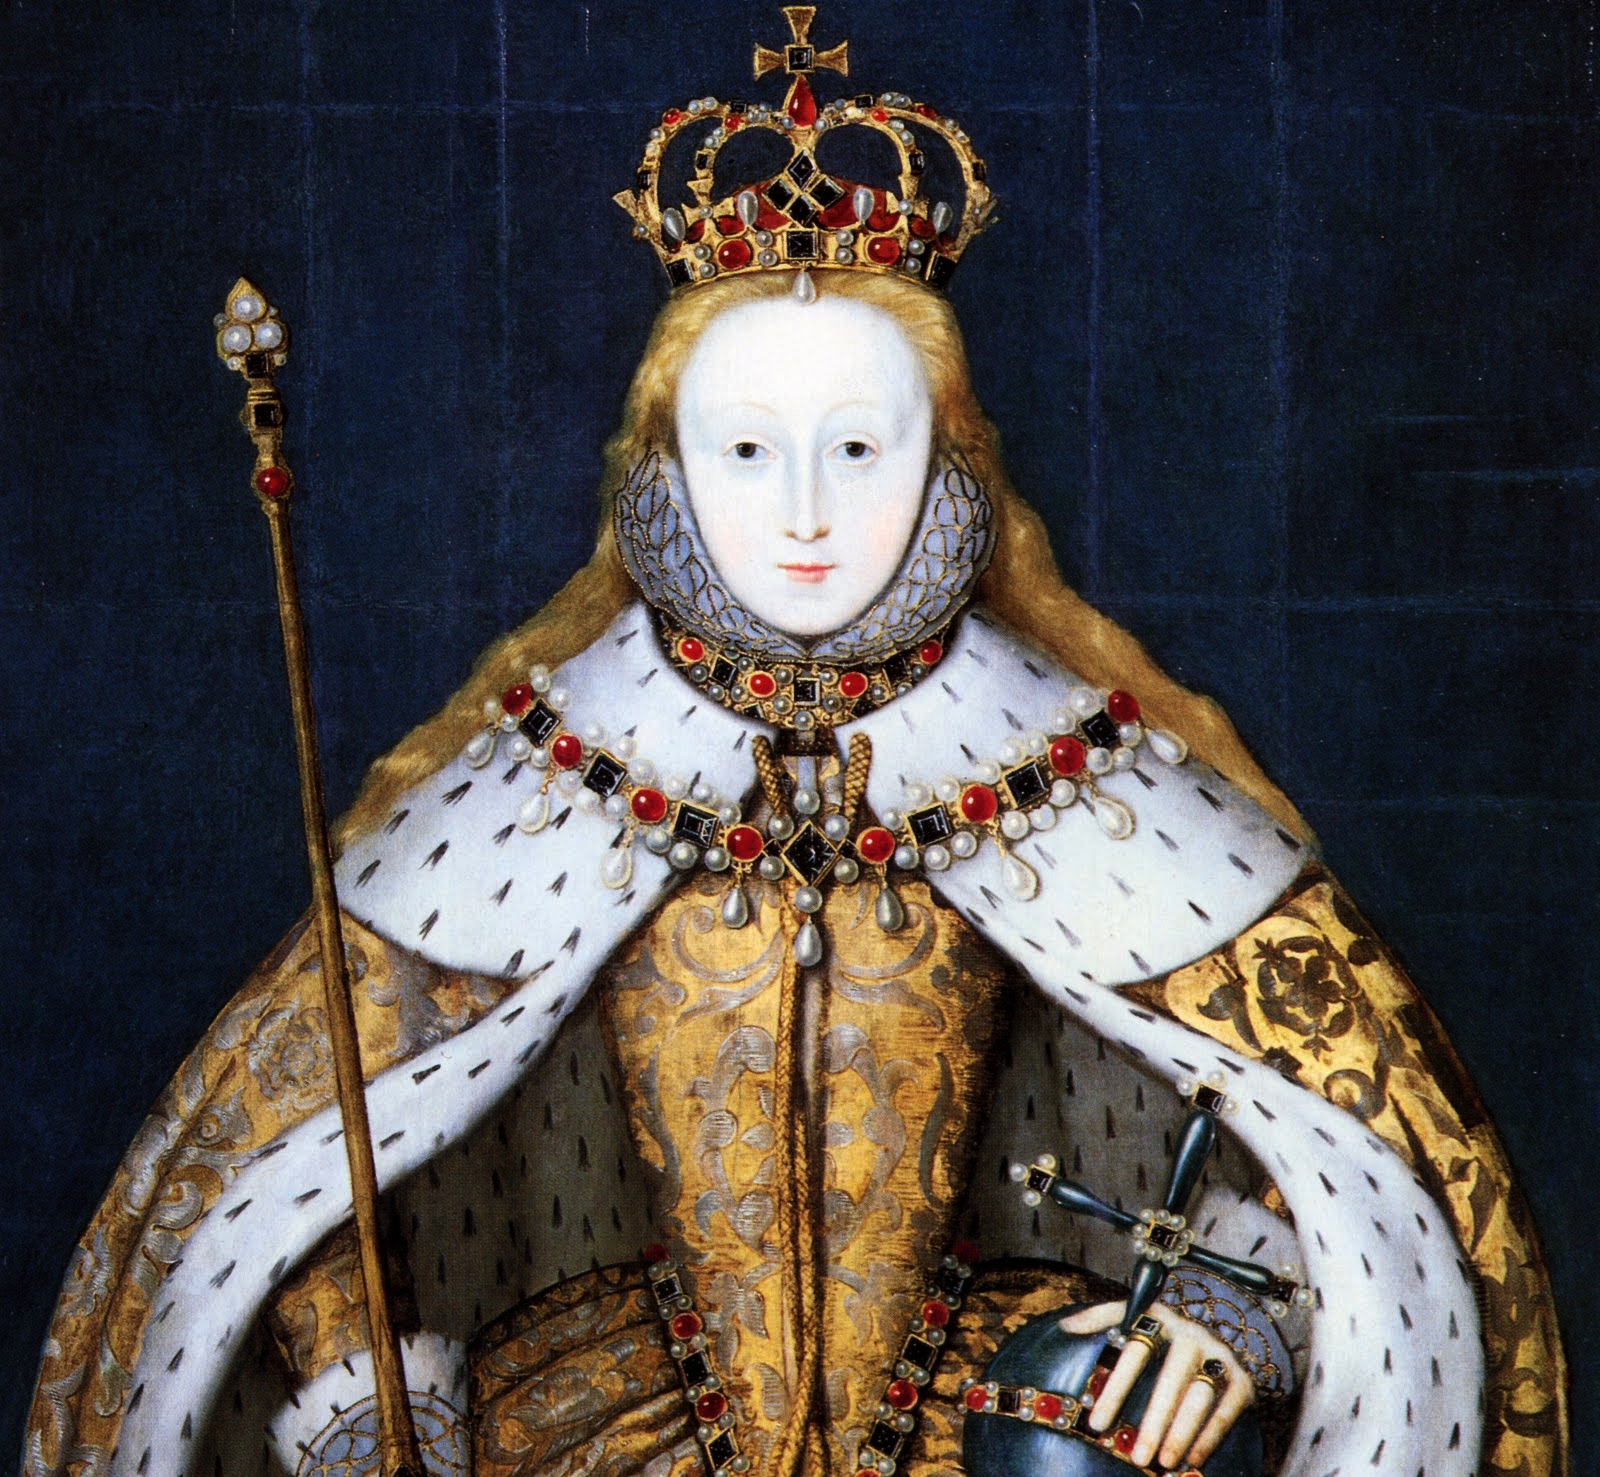 Queen Elizabeth I of England orders the arrest of Mary, Queen of Scots on May 12, 1568